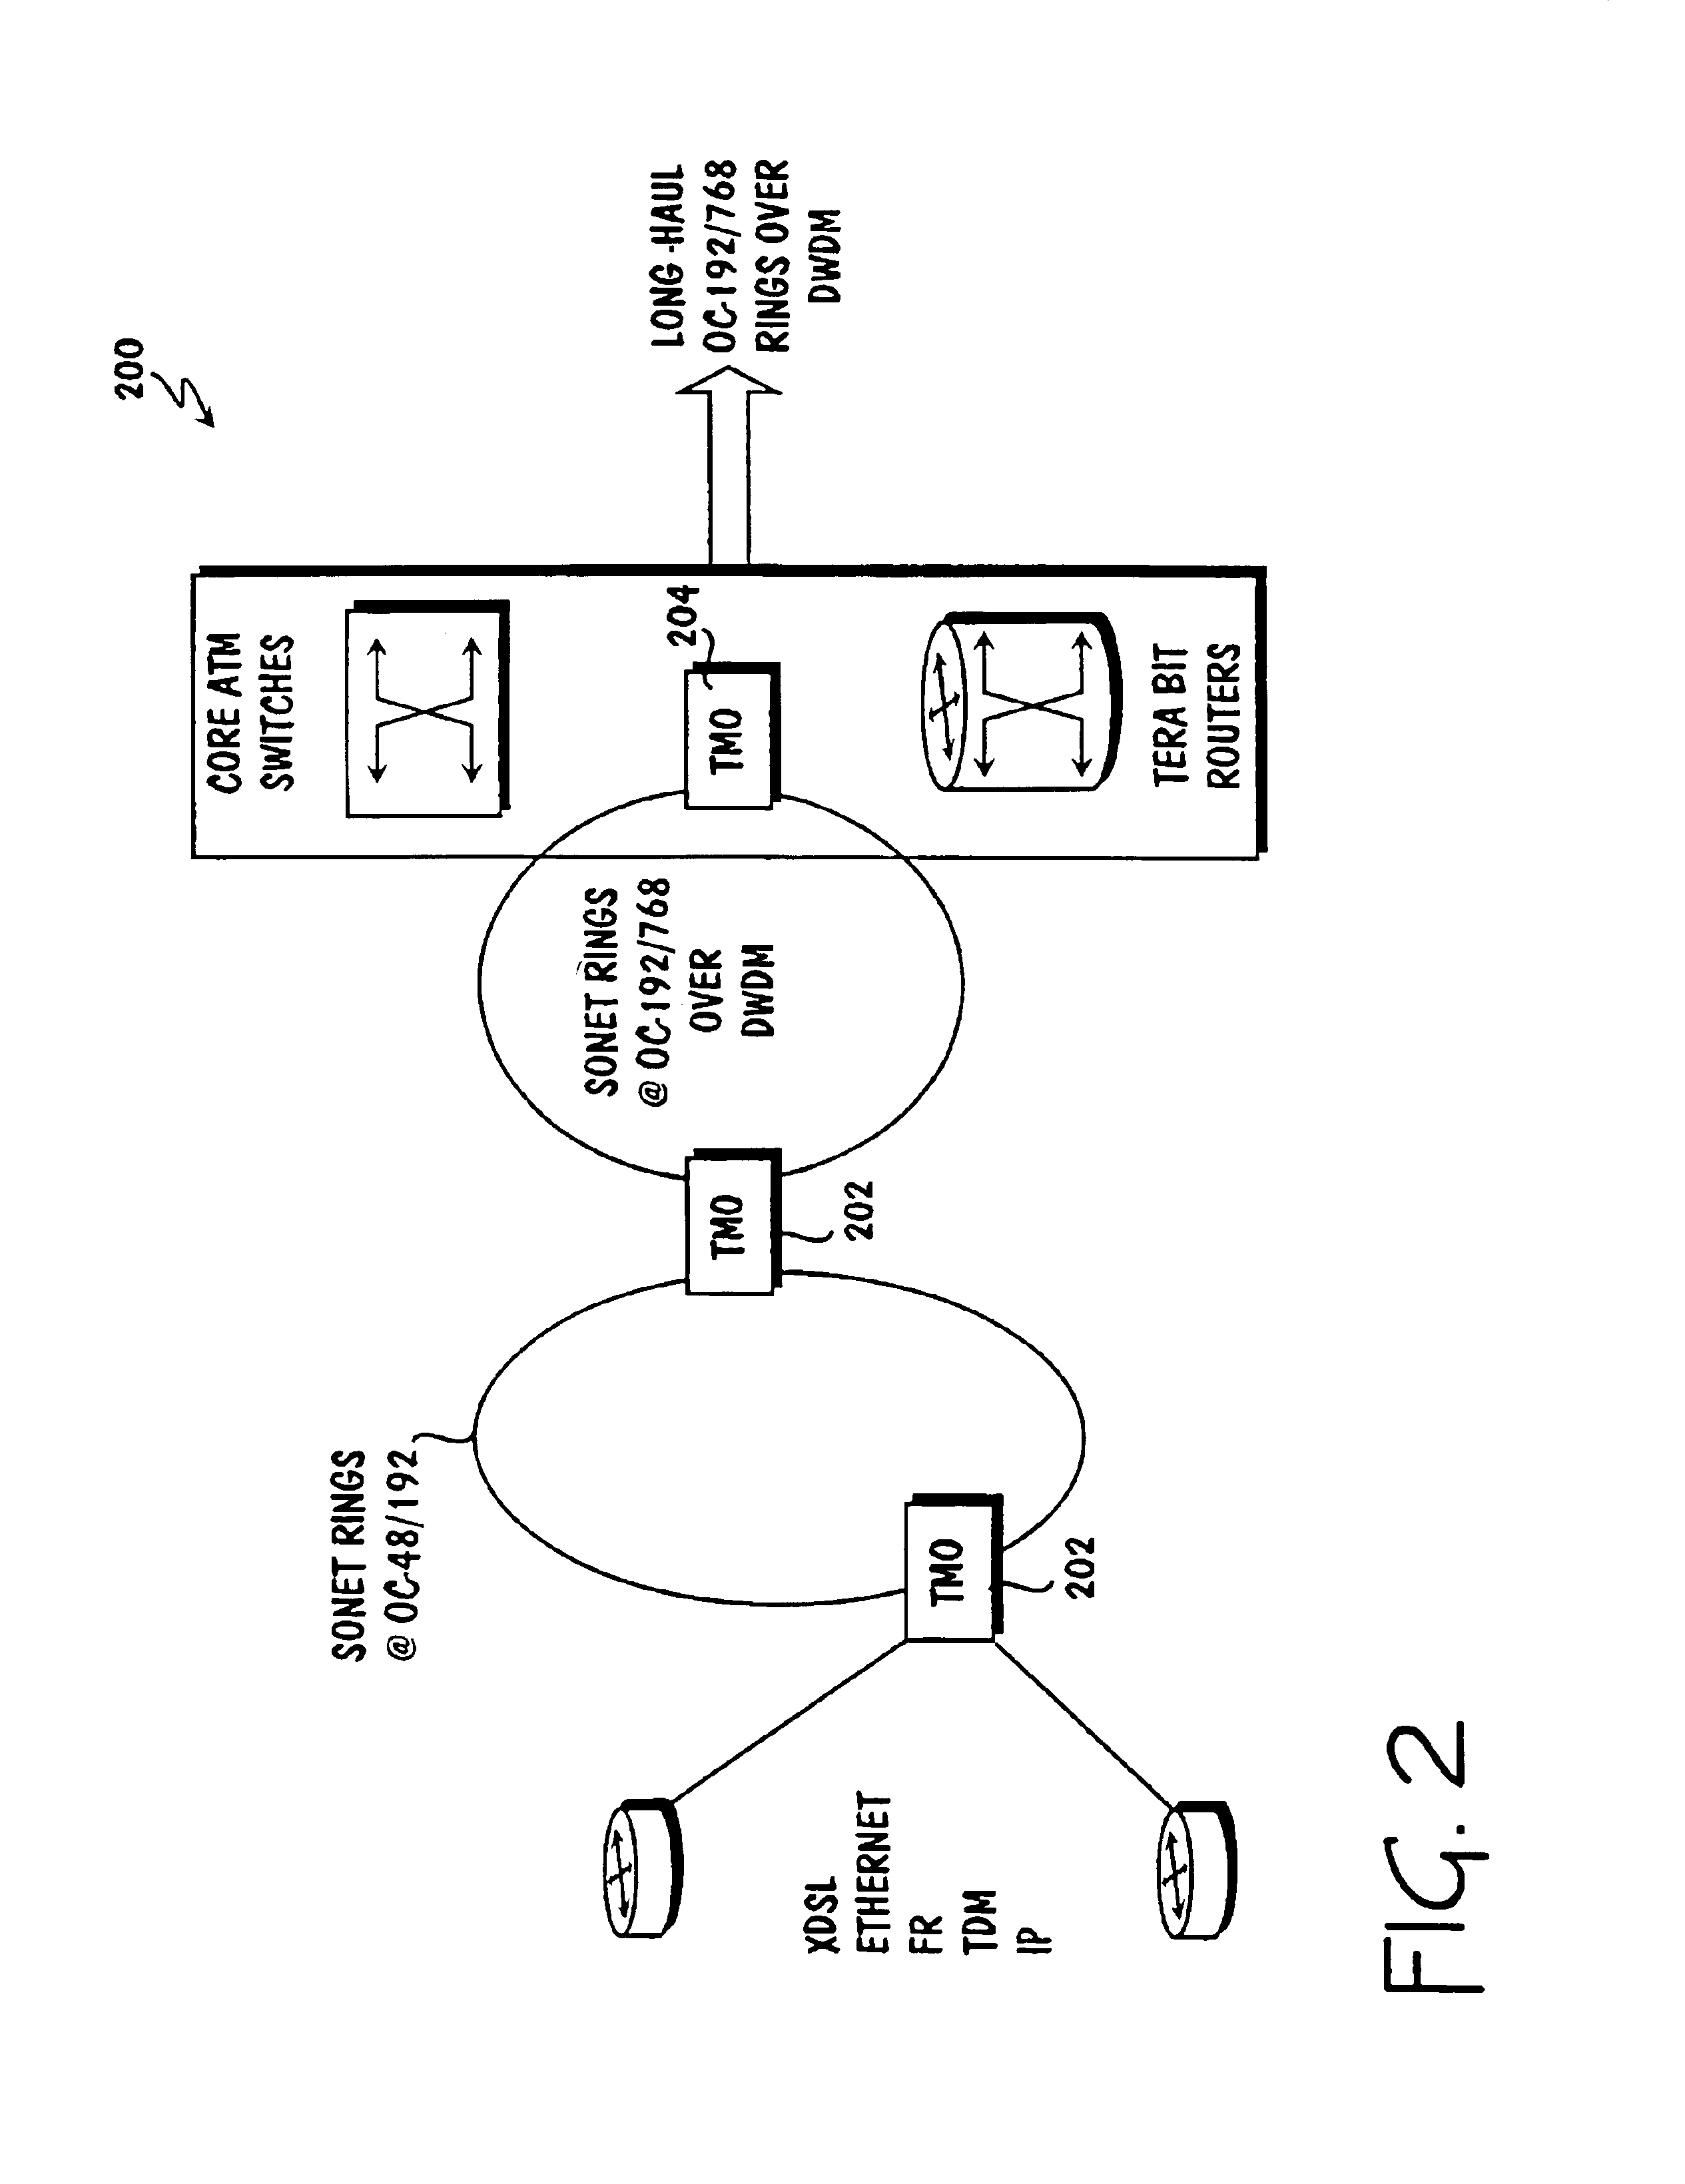 Interface receive for communications among network elements